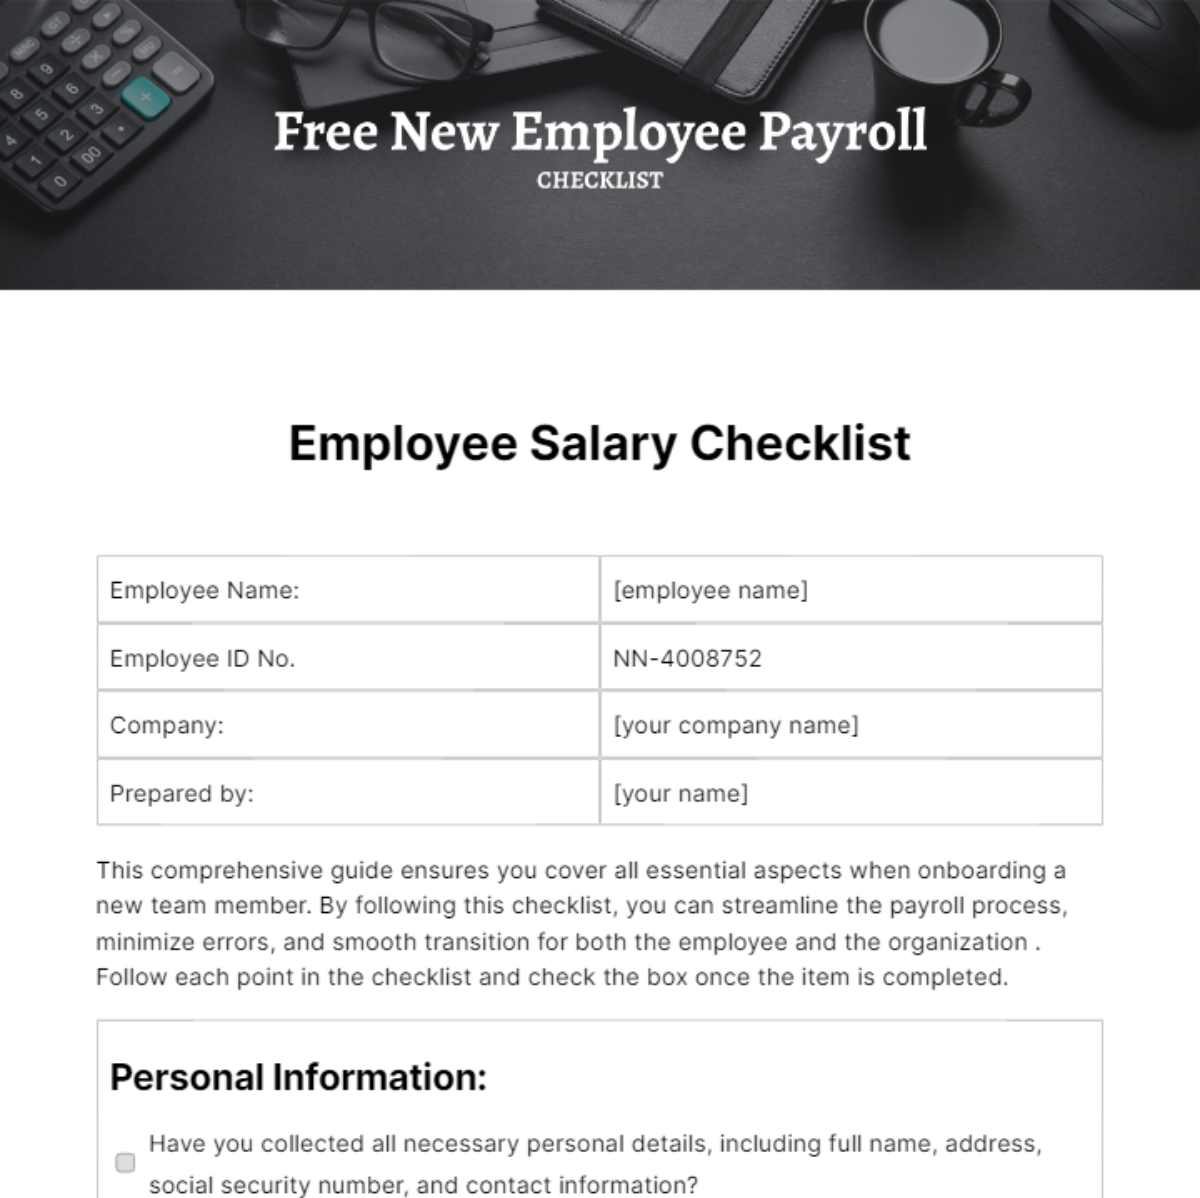 Free New Employee Payroll Checklist Template